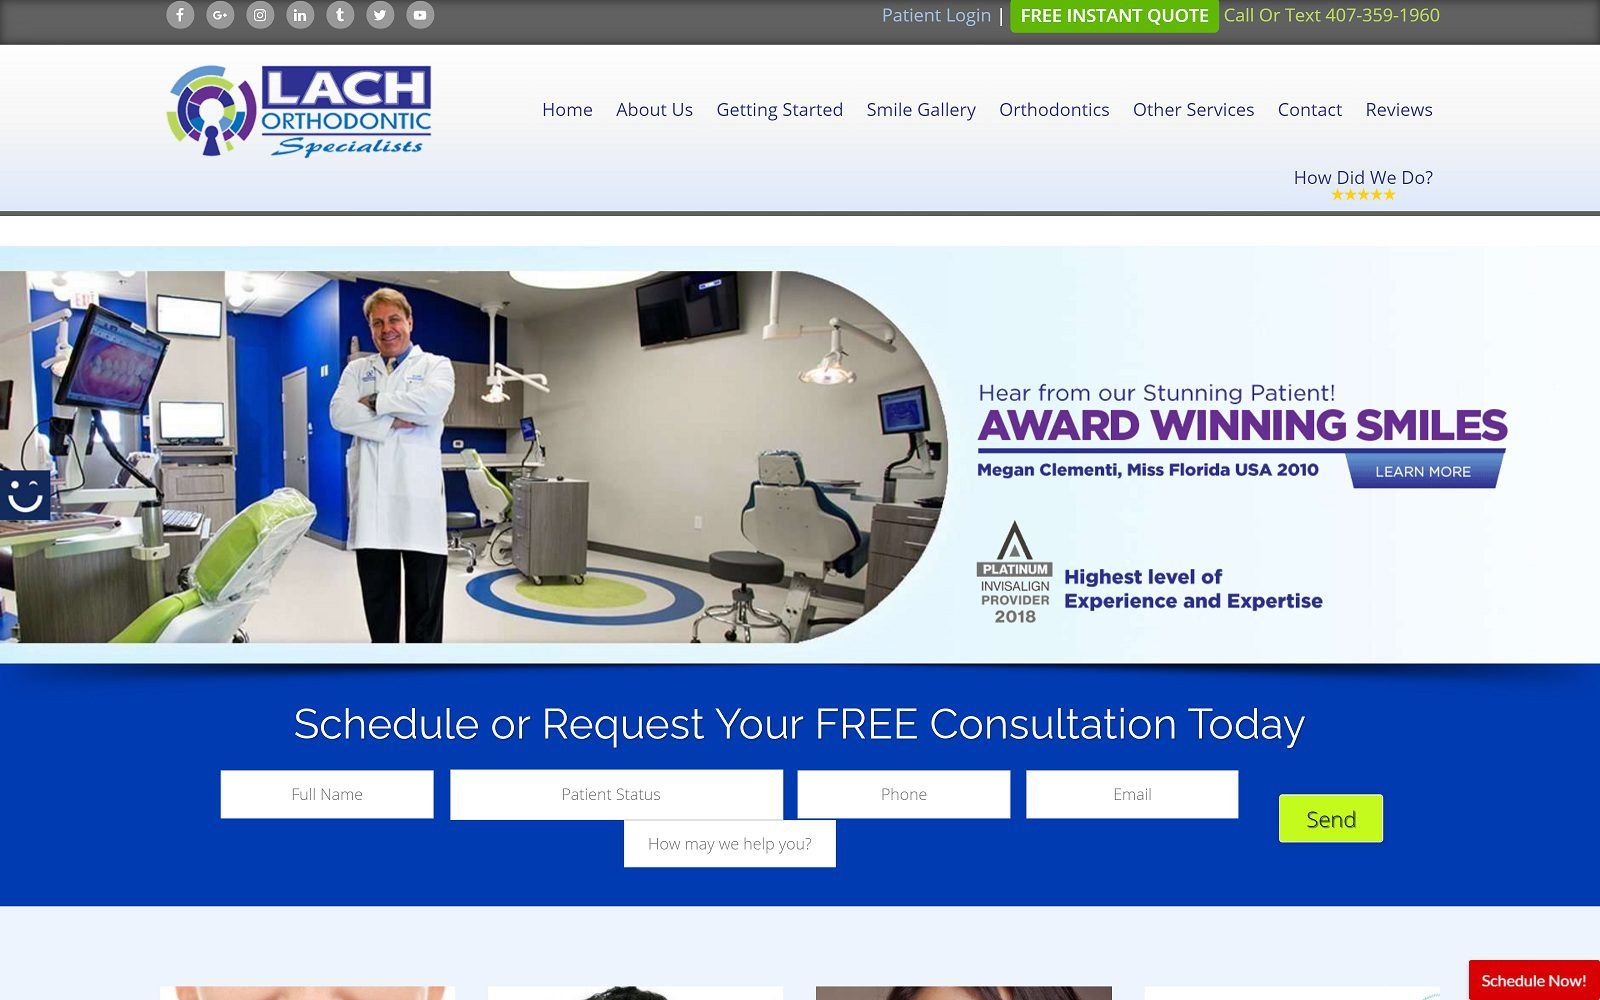 The screenshot of lach orthodontic specialists dr. David lach website